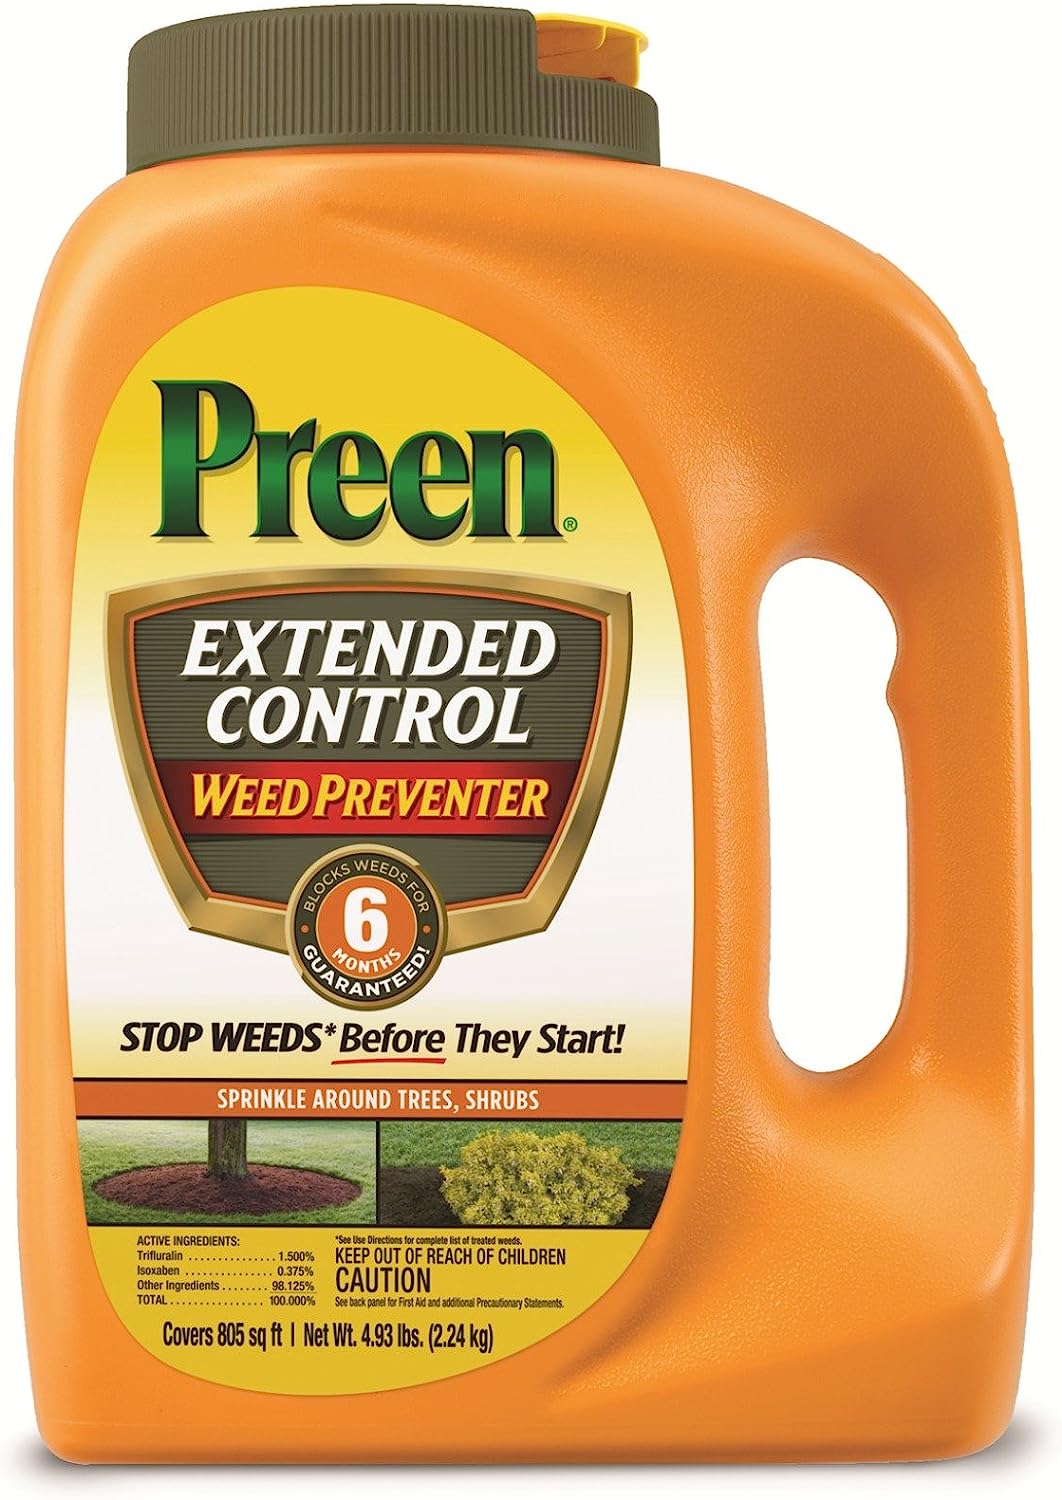 Preen Extended Control Weed Preventer - 4.93 lb. [...]